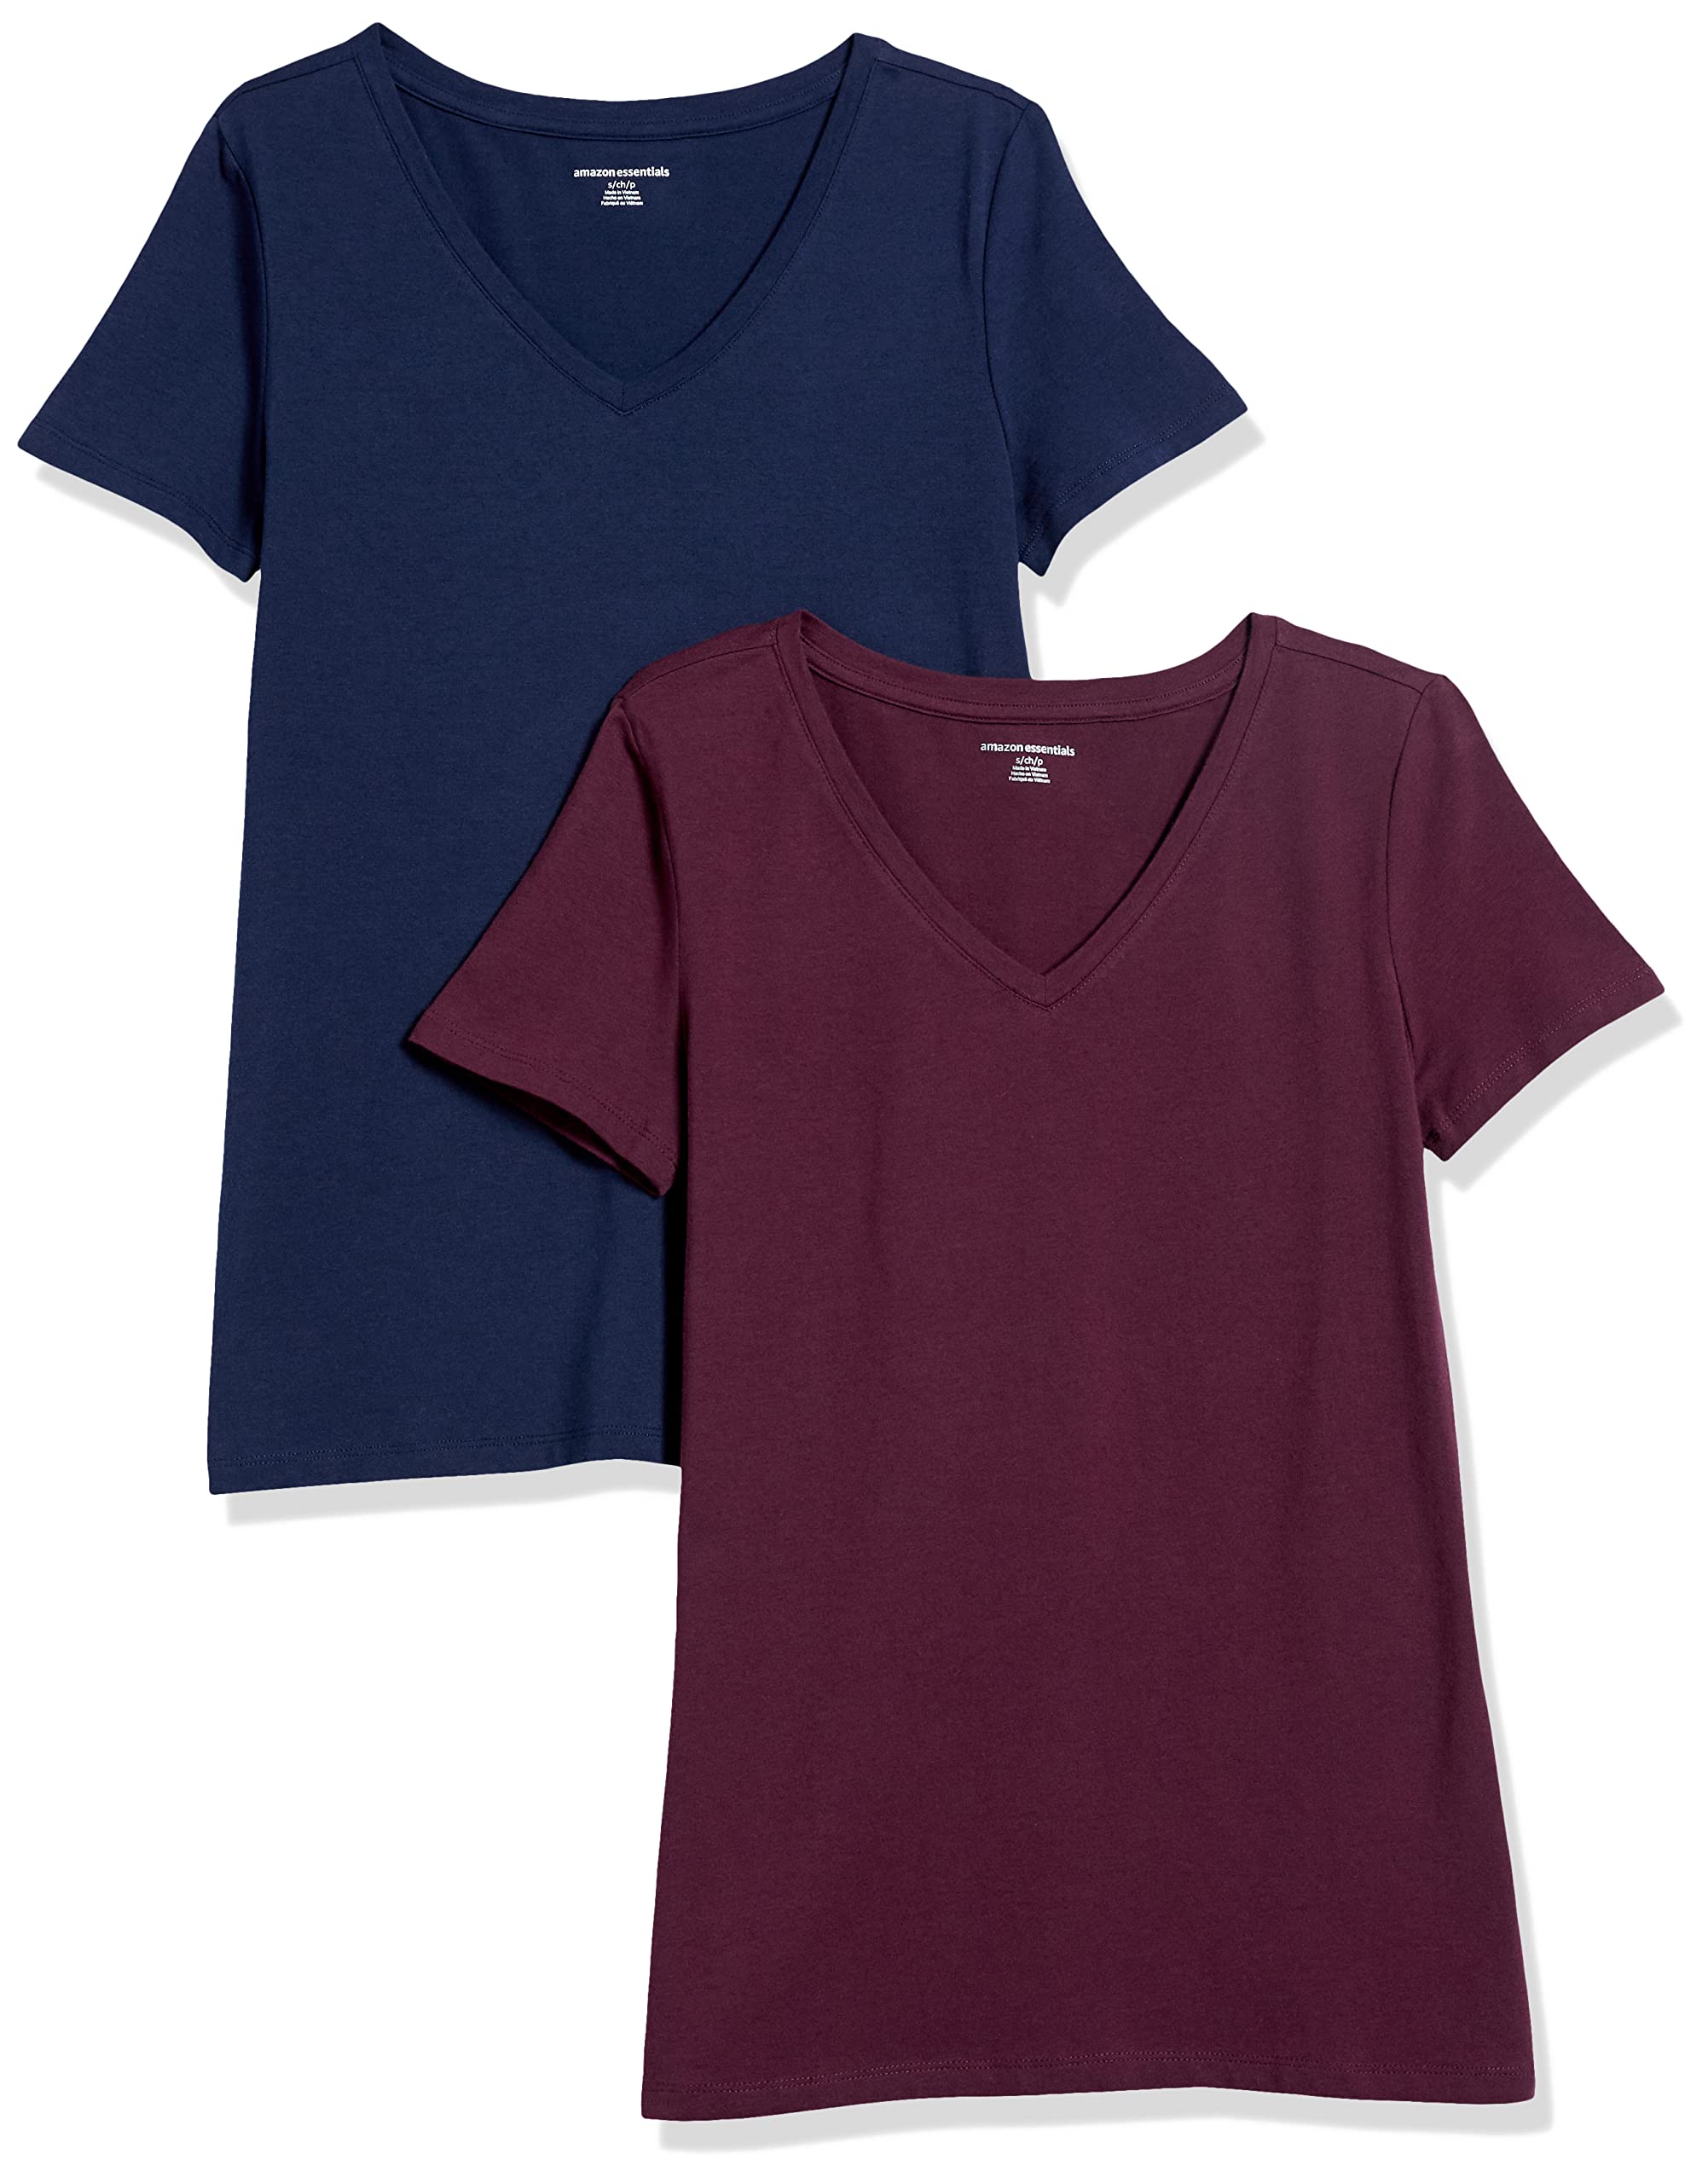 Amazon Essentials Women's Classic-Fit Short-Sleeve V-Neck T-Shirt, (Available in Plus Size), Multipacks